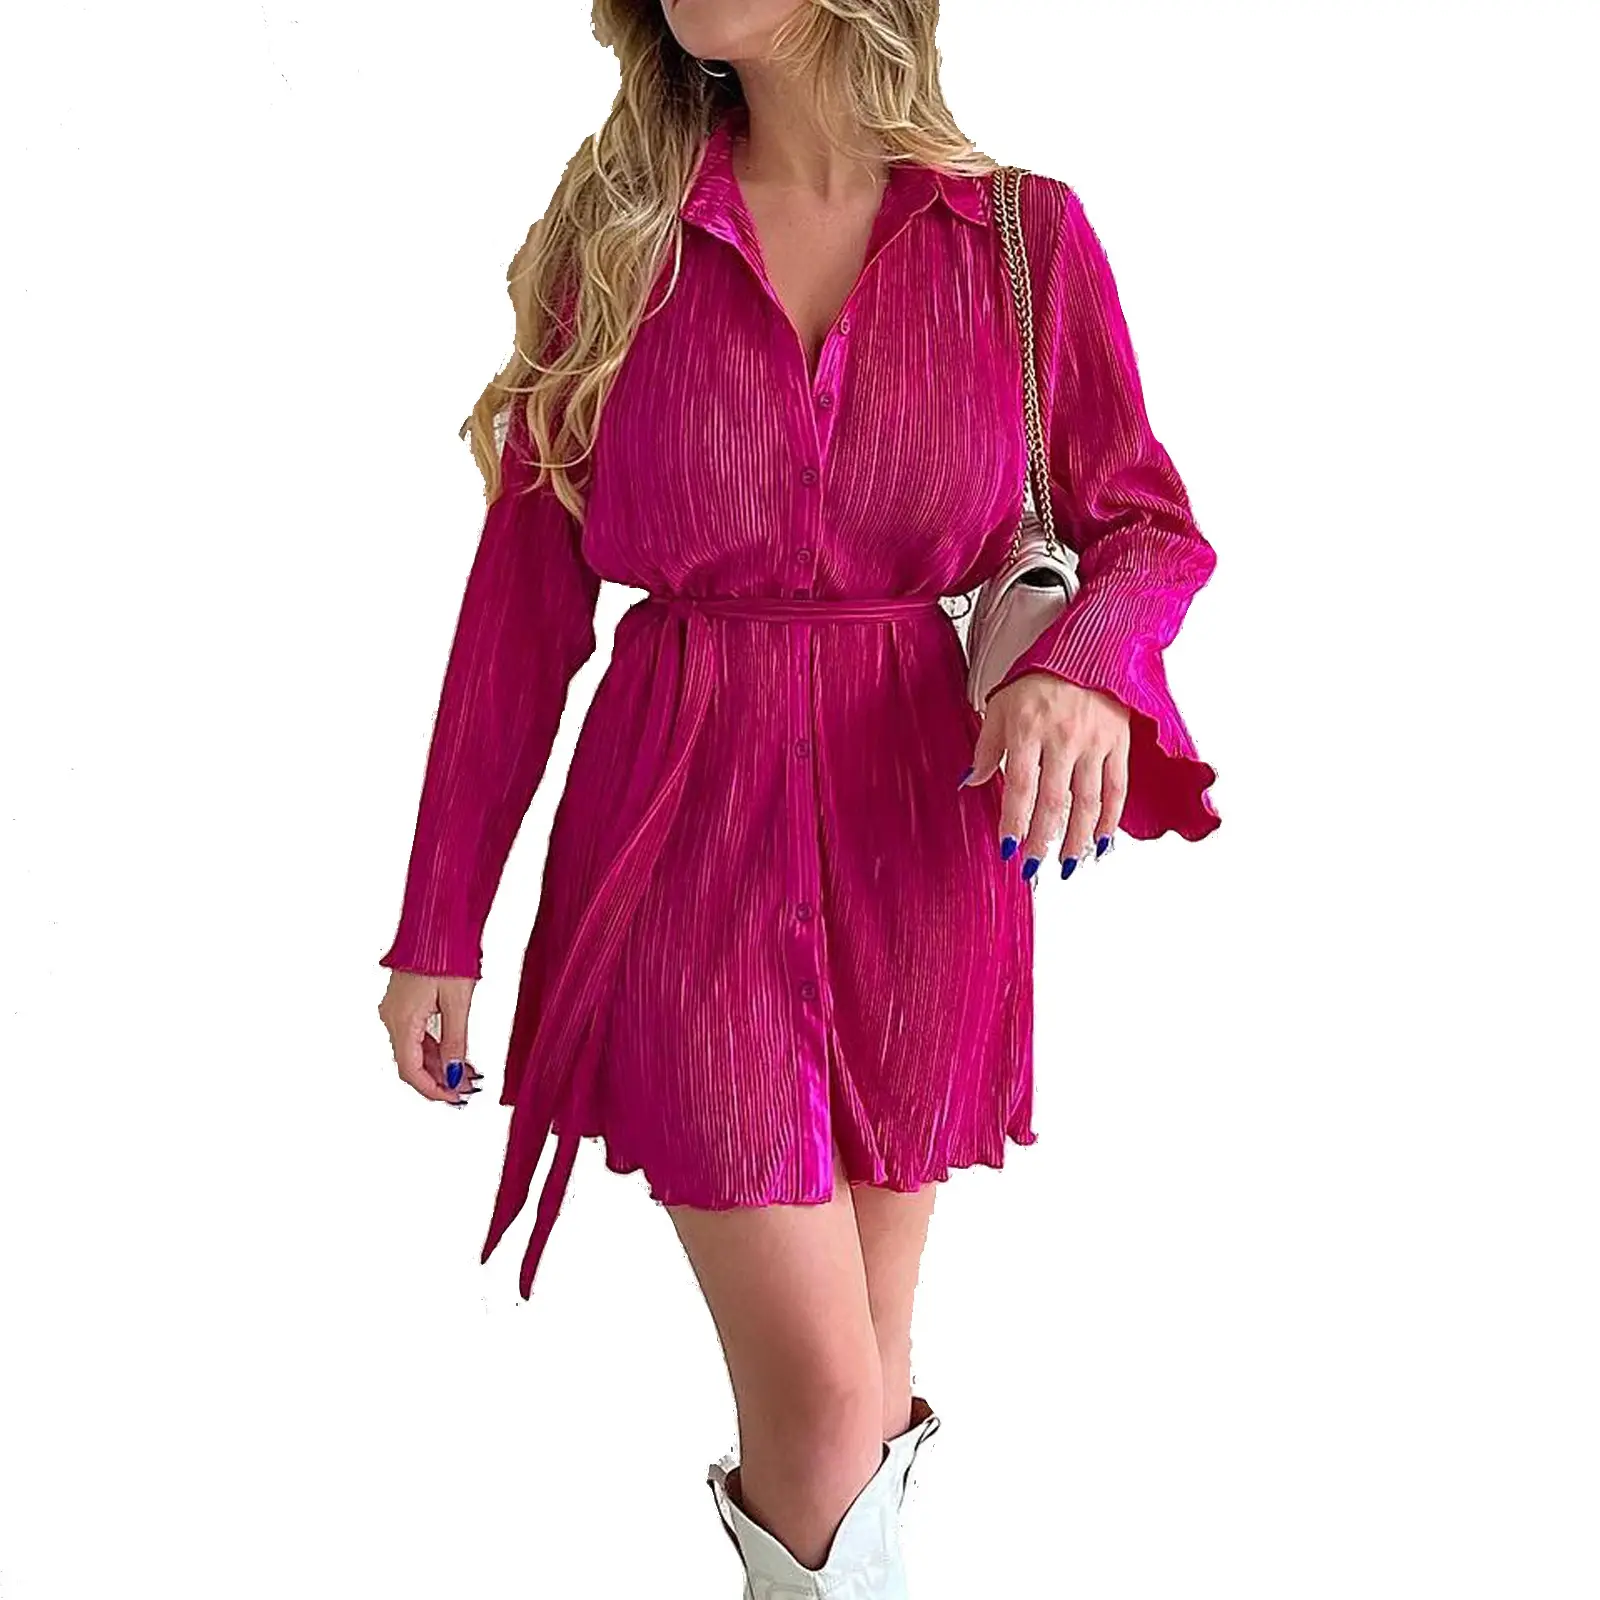 New Women's Romantic And Elegant Chiffon Pleated Party Dress Ladies Button Down Casual Dresses